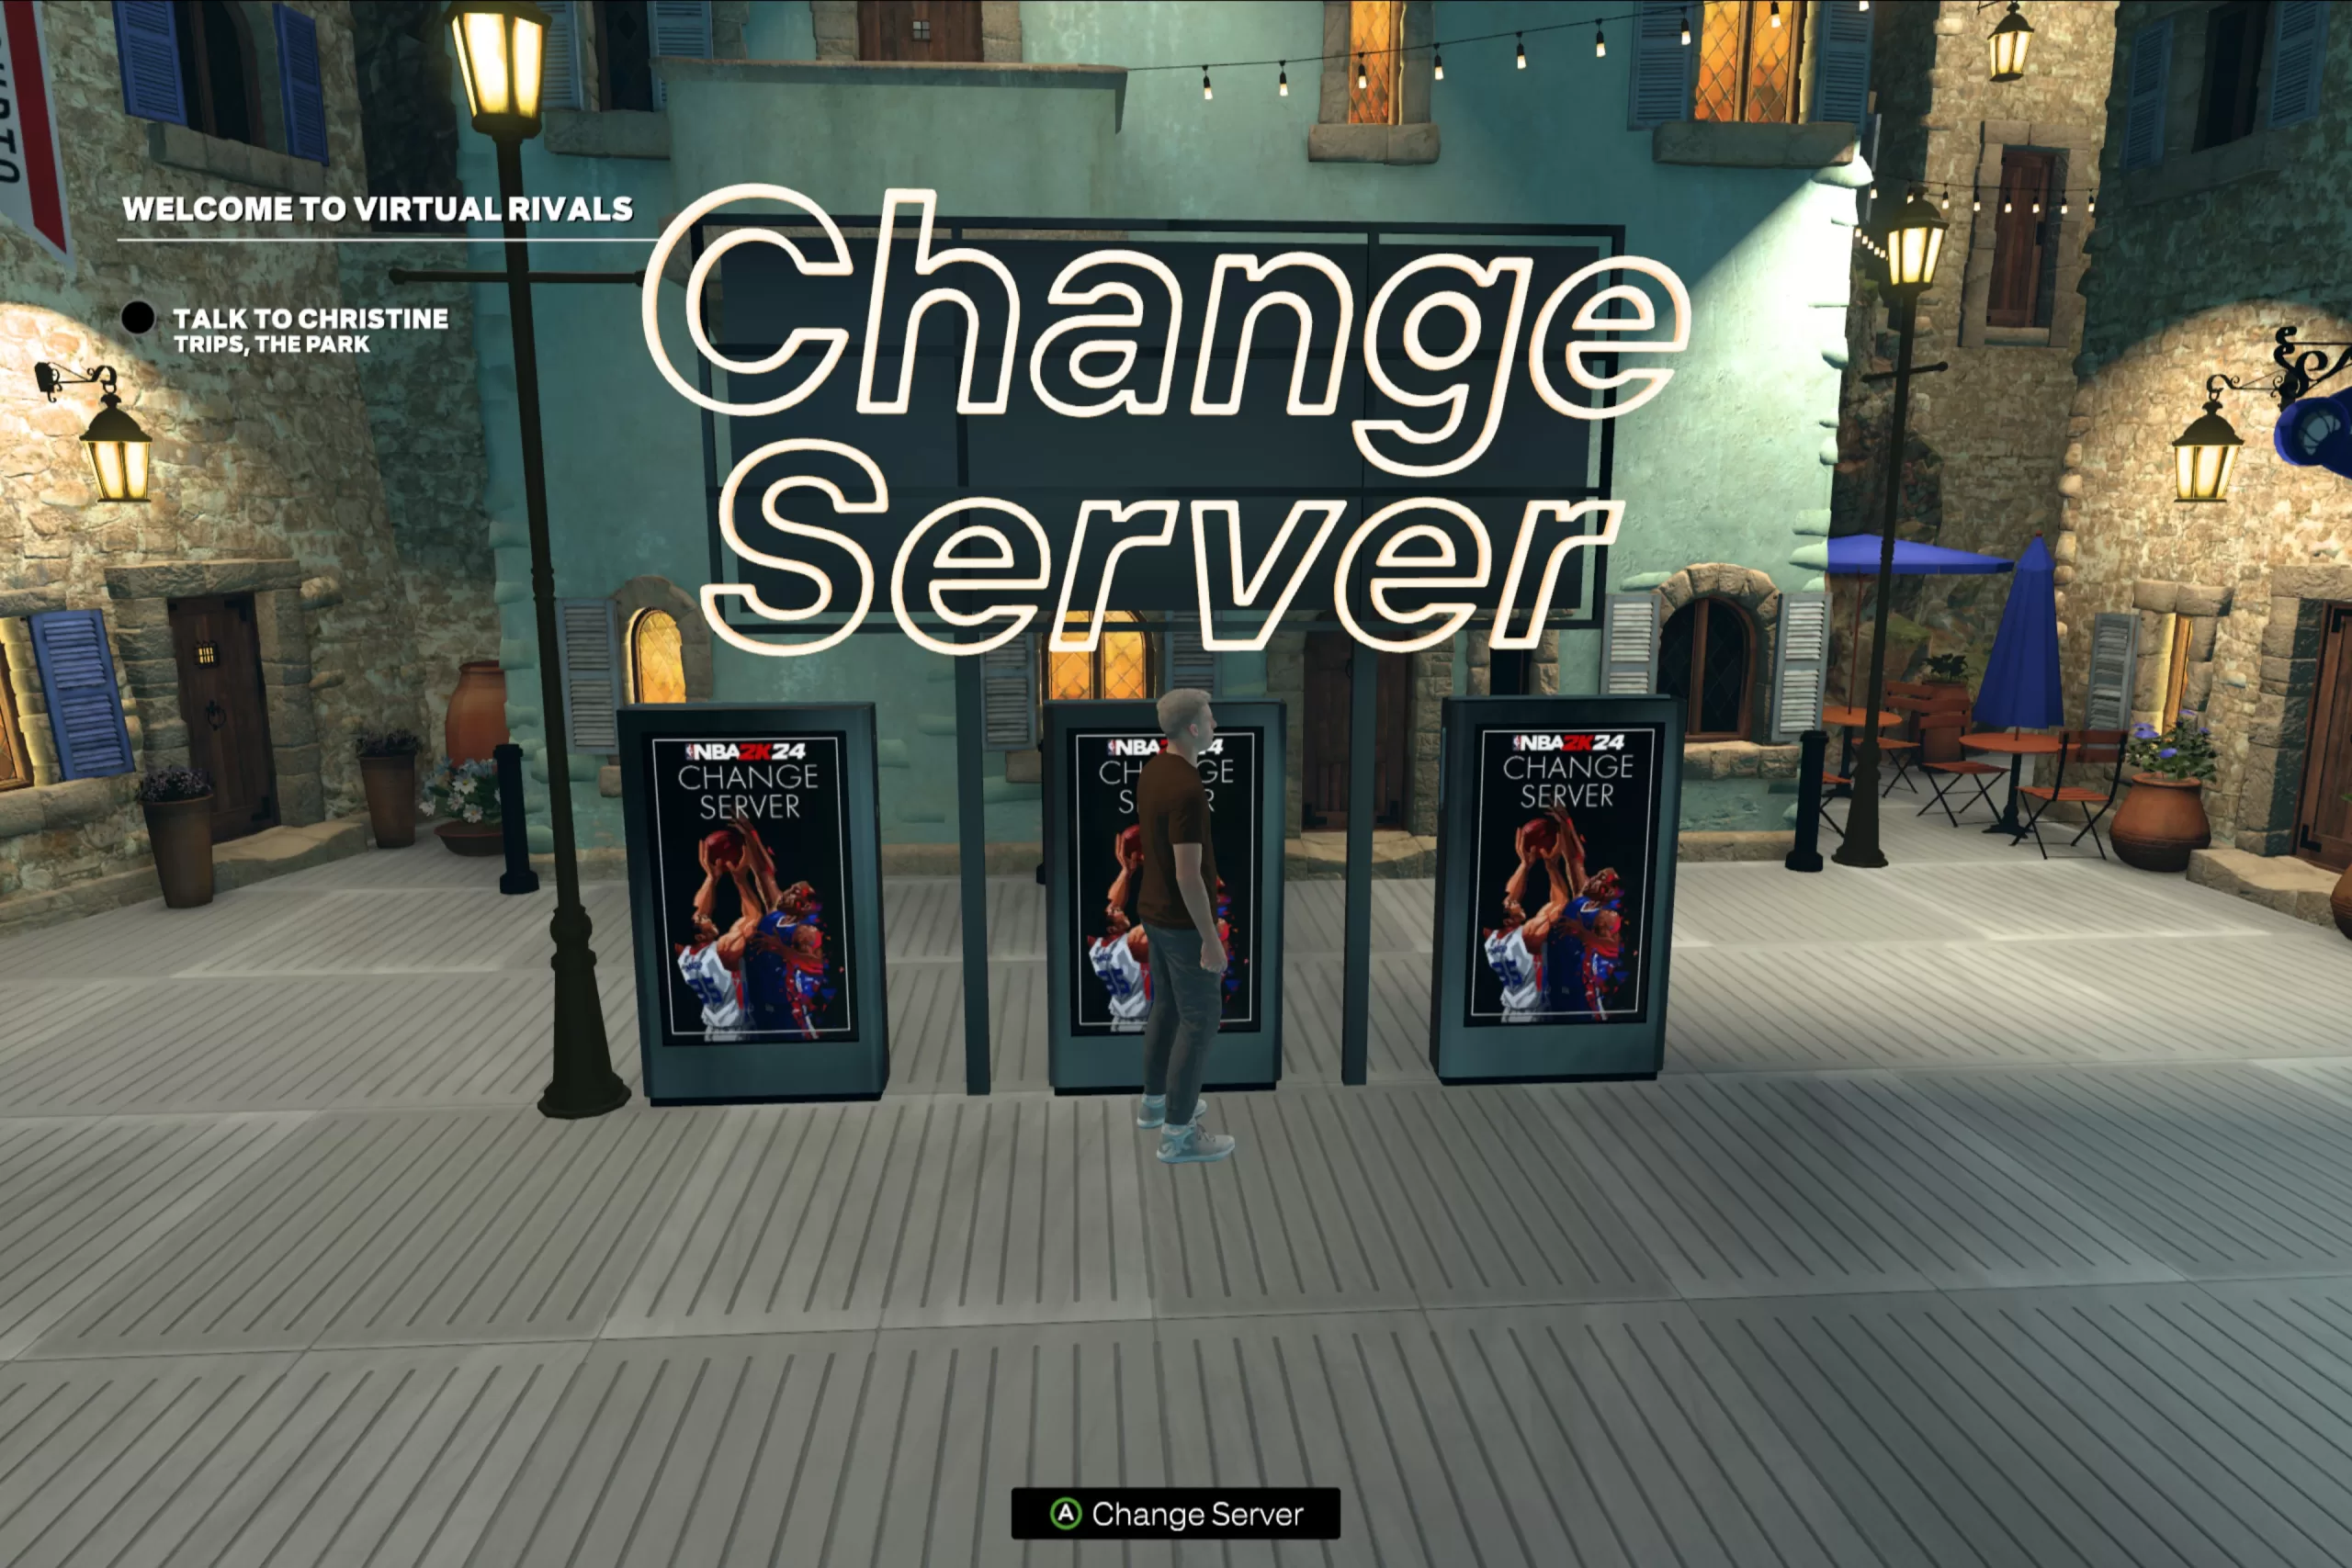 In the playground, find the sign that says Change Server.